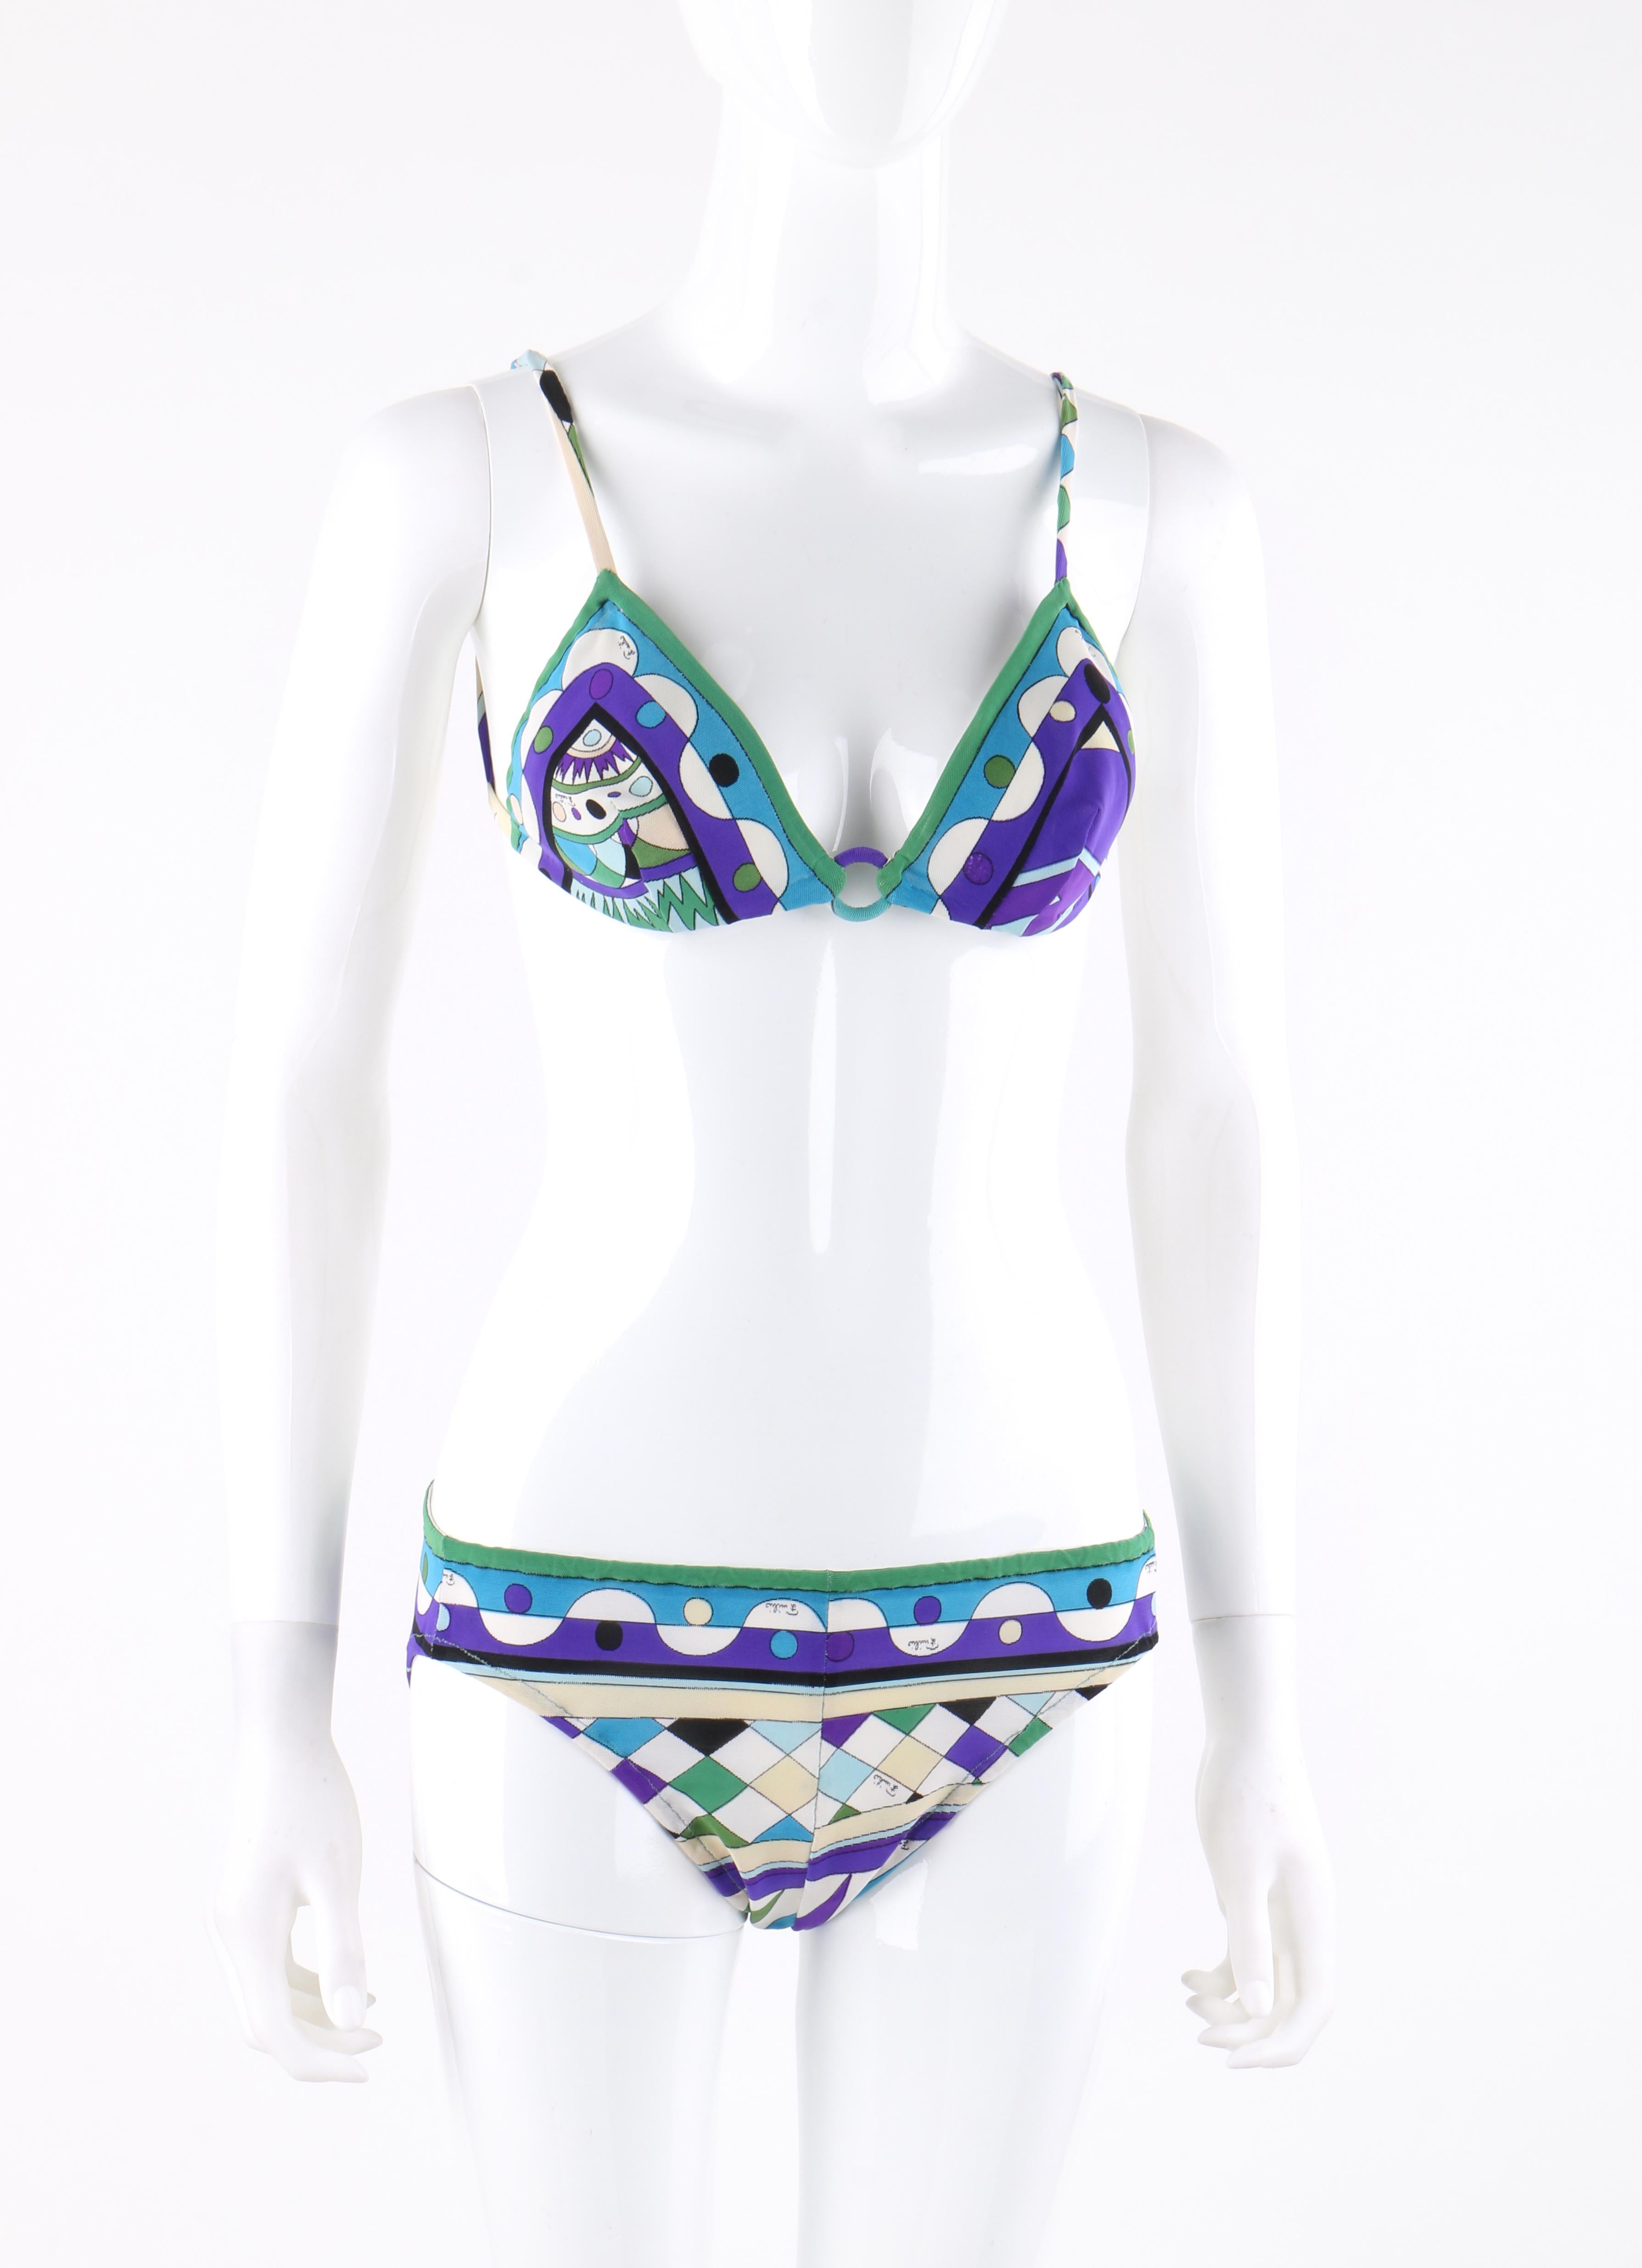 EMILIO PUCCI c.1960’s Blue Signature Print 2 Piece Bikini Bathing Suit Swimsuit
 
Circa: 1960’s
Label(s): Emilio Pucci / Neiman Marcus Trophy Room   
Style: Bikini	
Color(s): Shades of blue, green, purple, tan and off-white
Lined: Yes
Marked Fabric